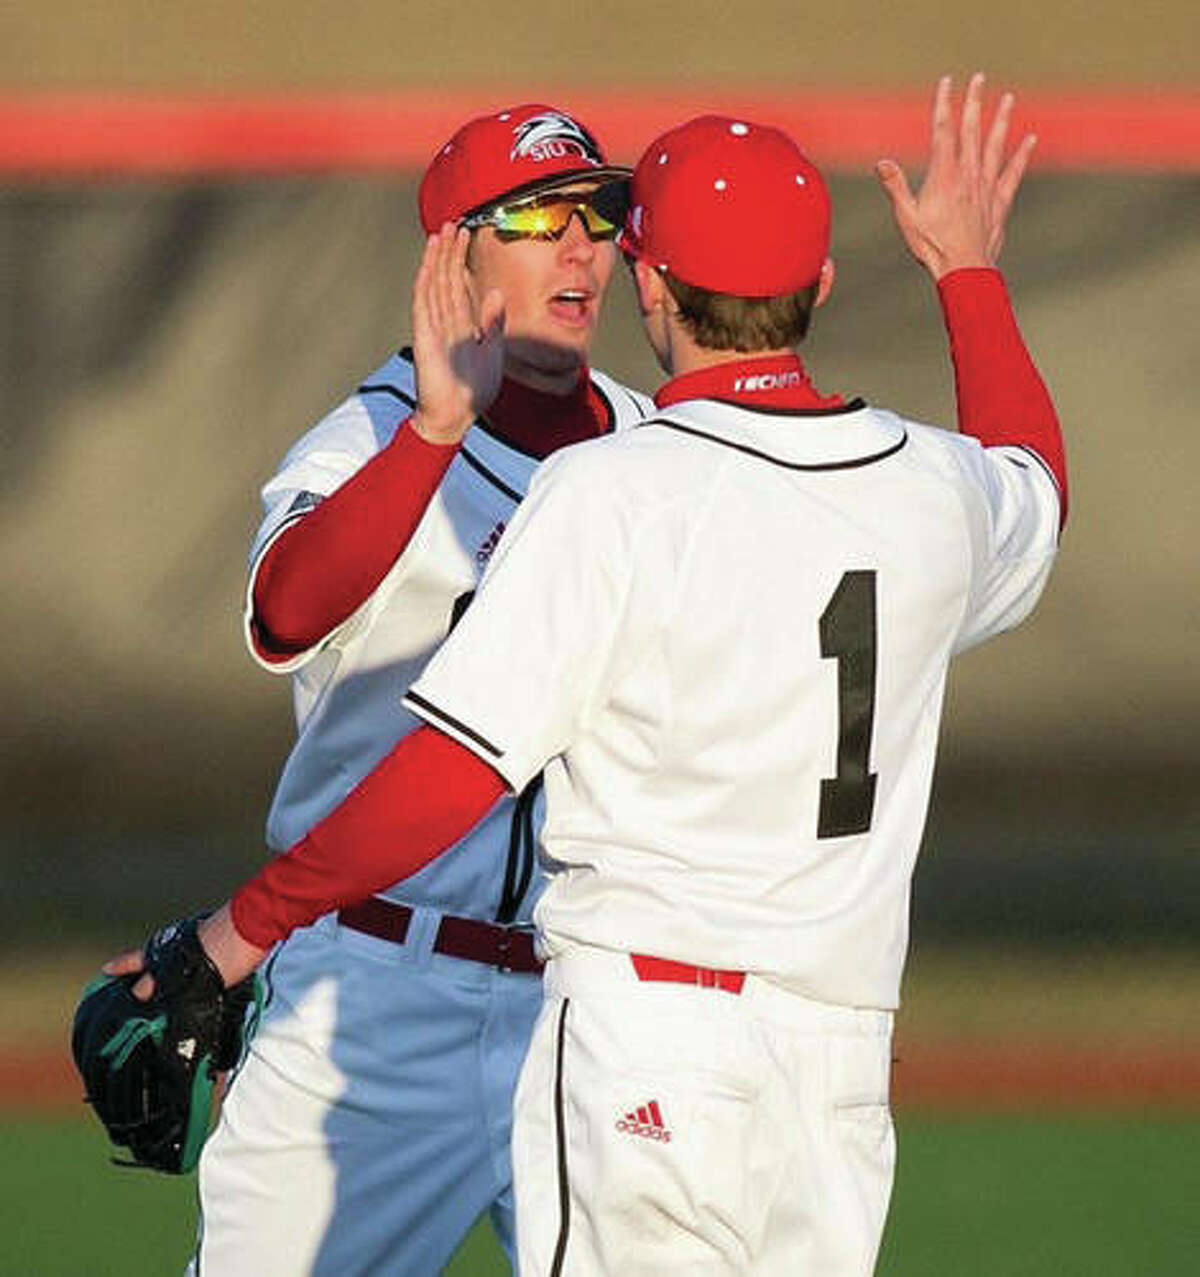 SIUE’s Alec Skender (1) and a teammate celebrate during the Cougars’ series-opening victory over Northern Illinois on Friday at Roy E. Lee Field in Edwardsville. SIUE completed the four-game sweep of Northern Illinois on Sunday.